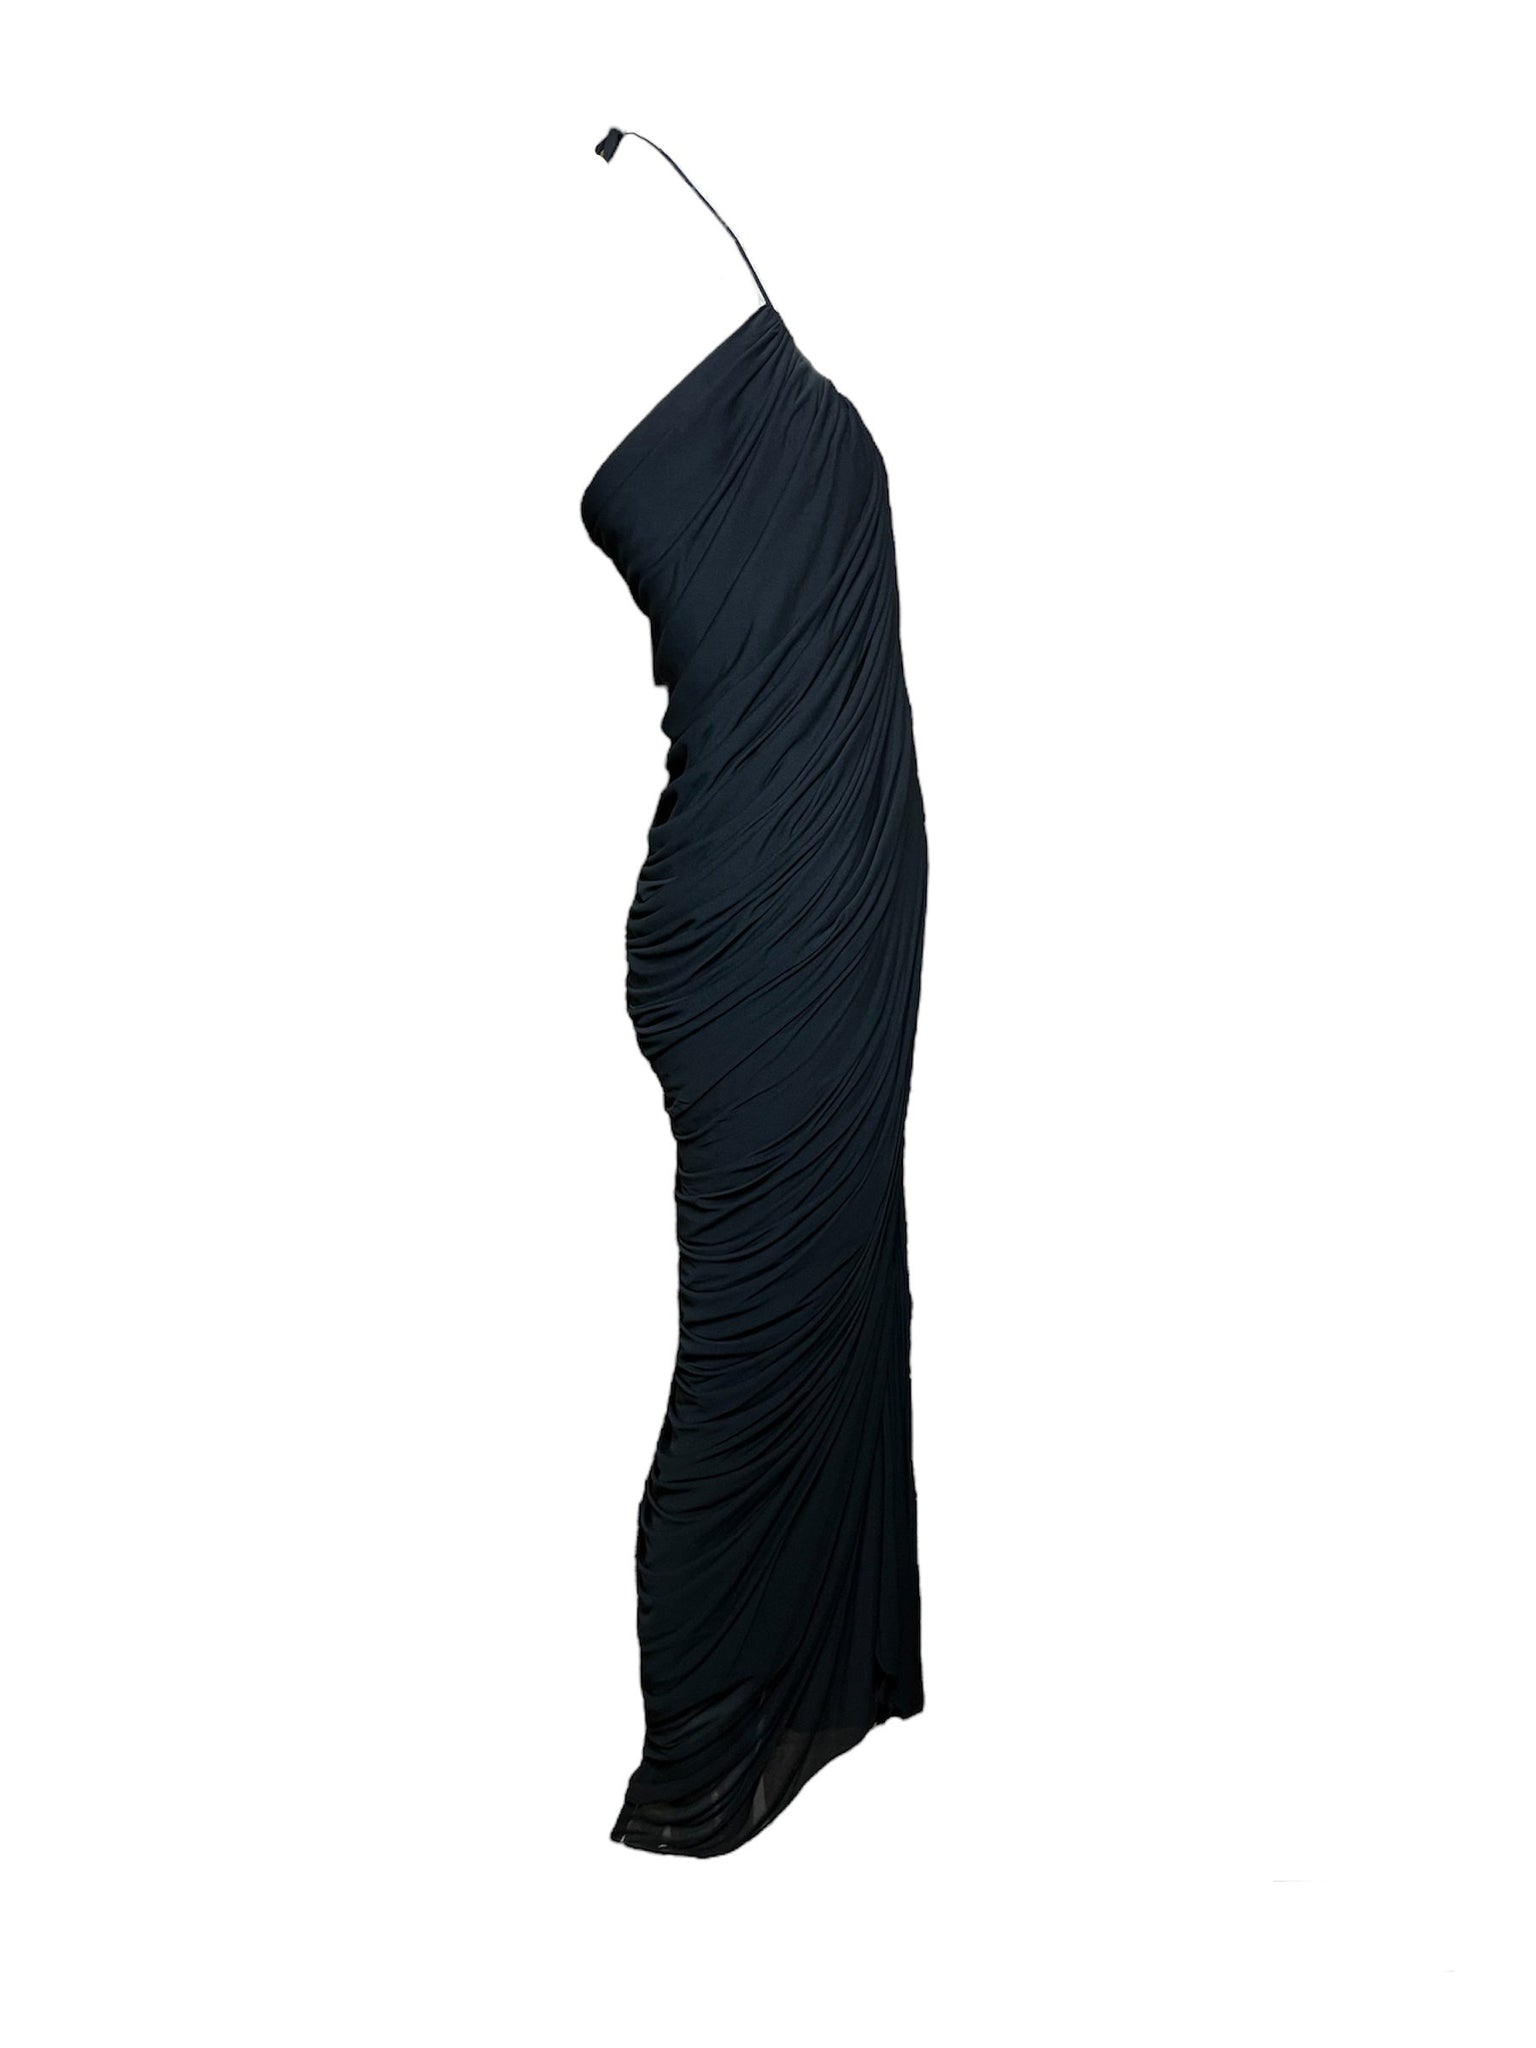 Halston Fall 1981 Black "Sexy Slink" Jersey Halter/One Shoulder Gown SIDE 2 of 4